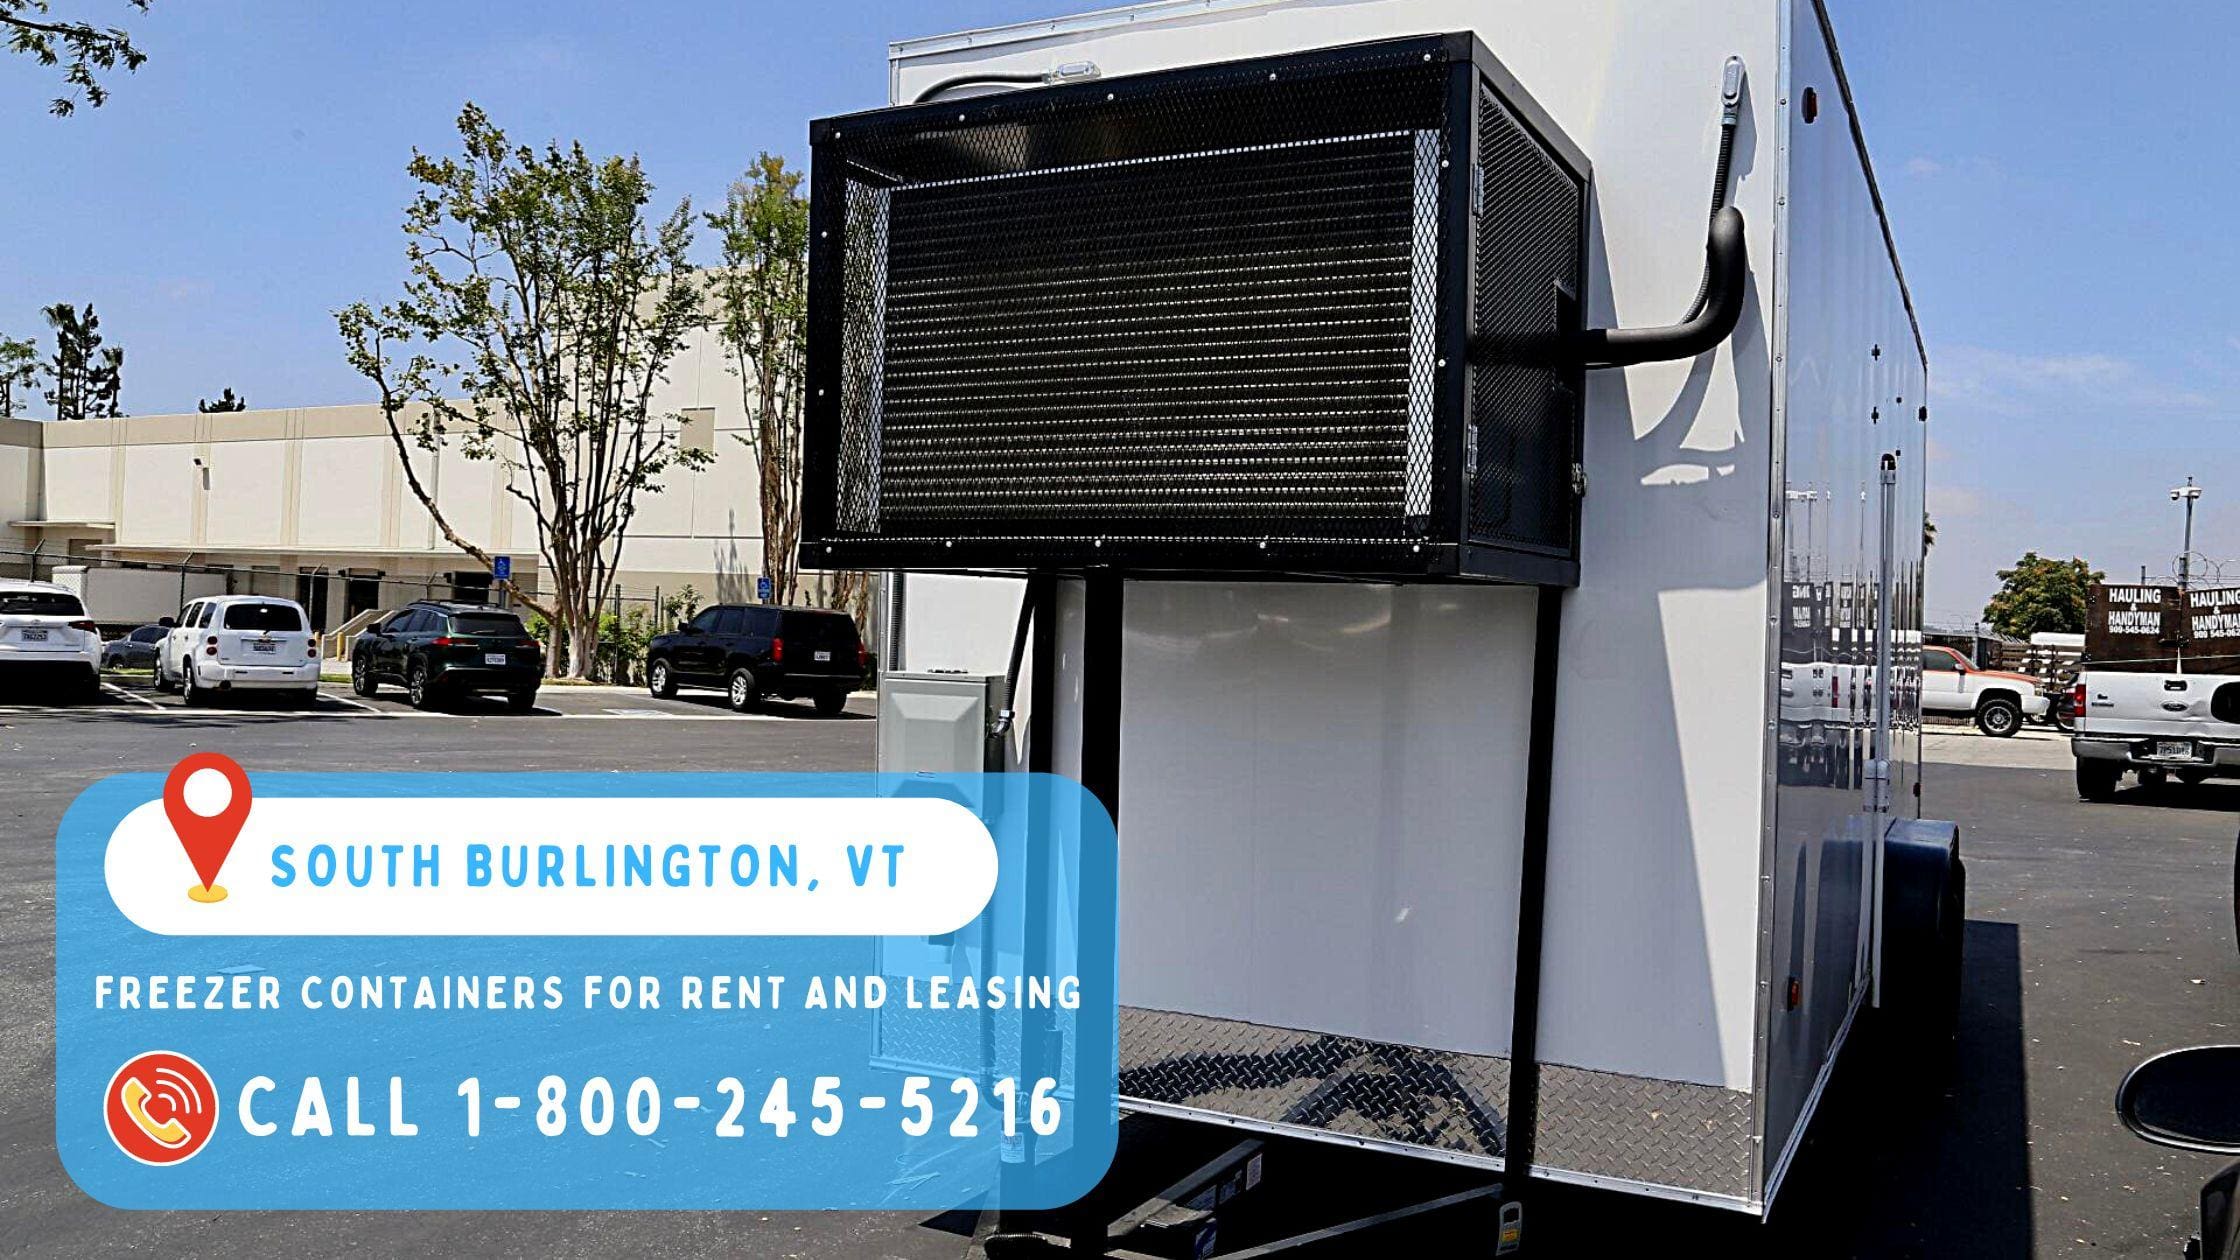 Freezer Containers for rent and leasing in South Burlington